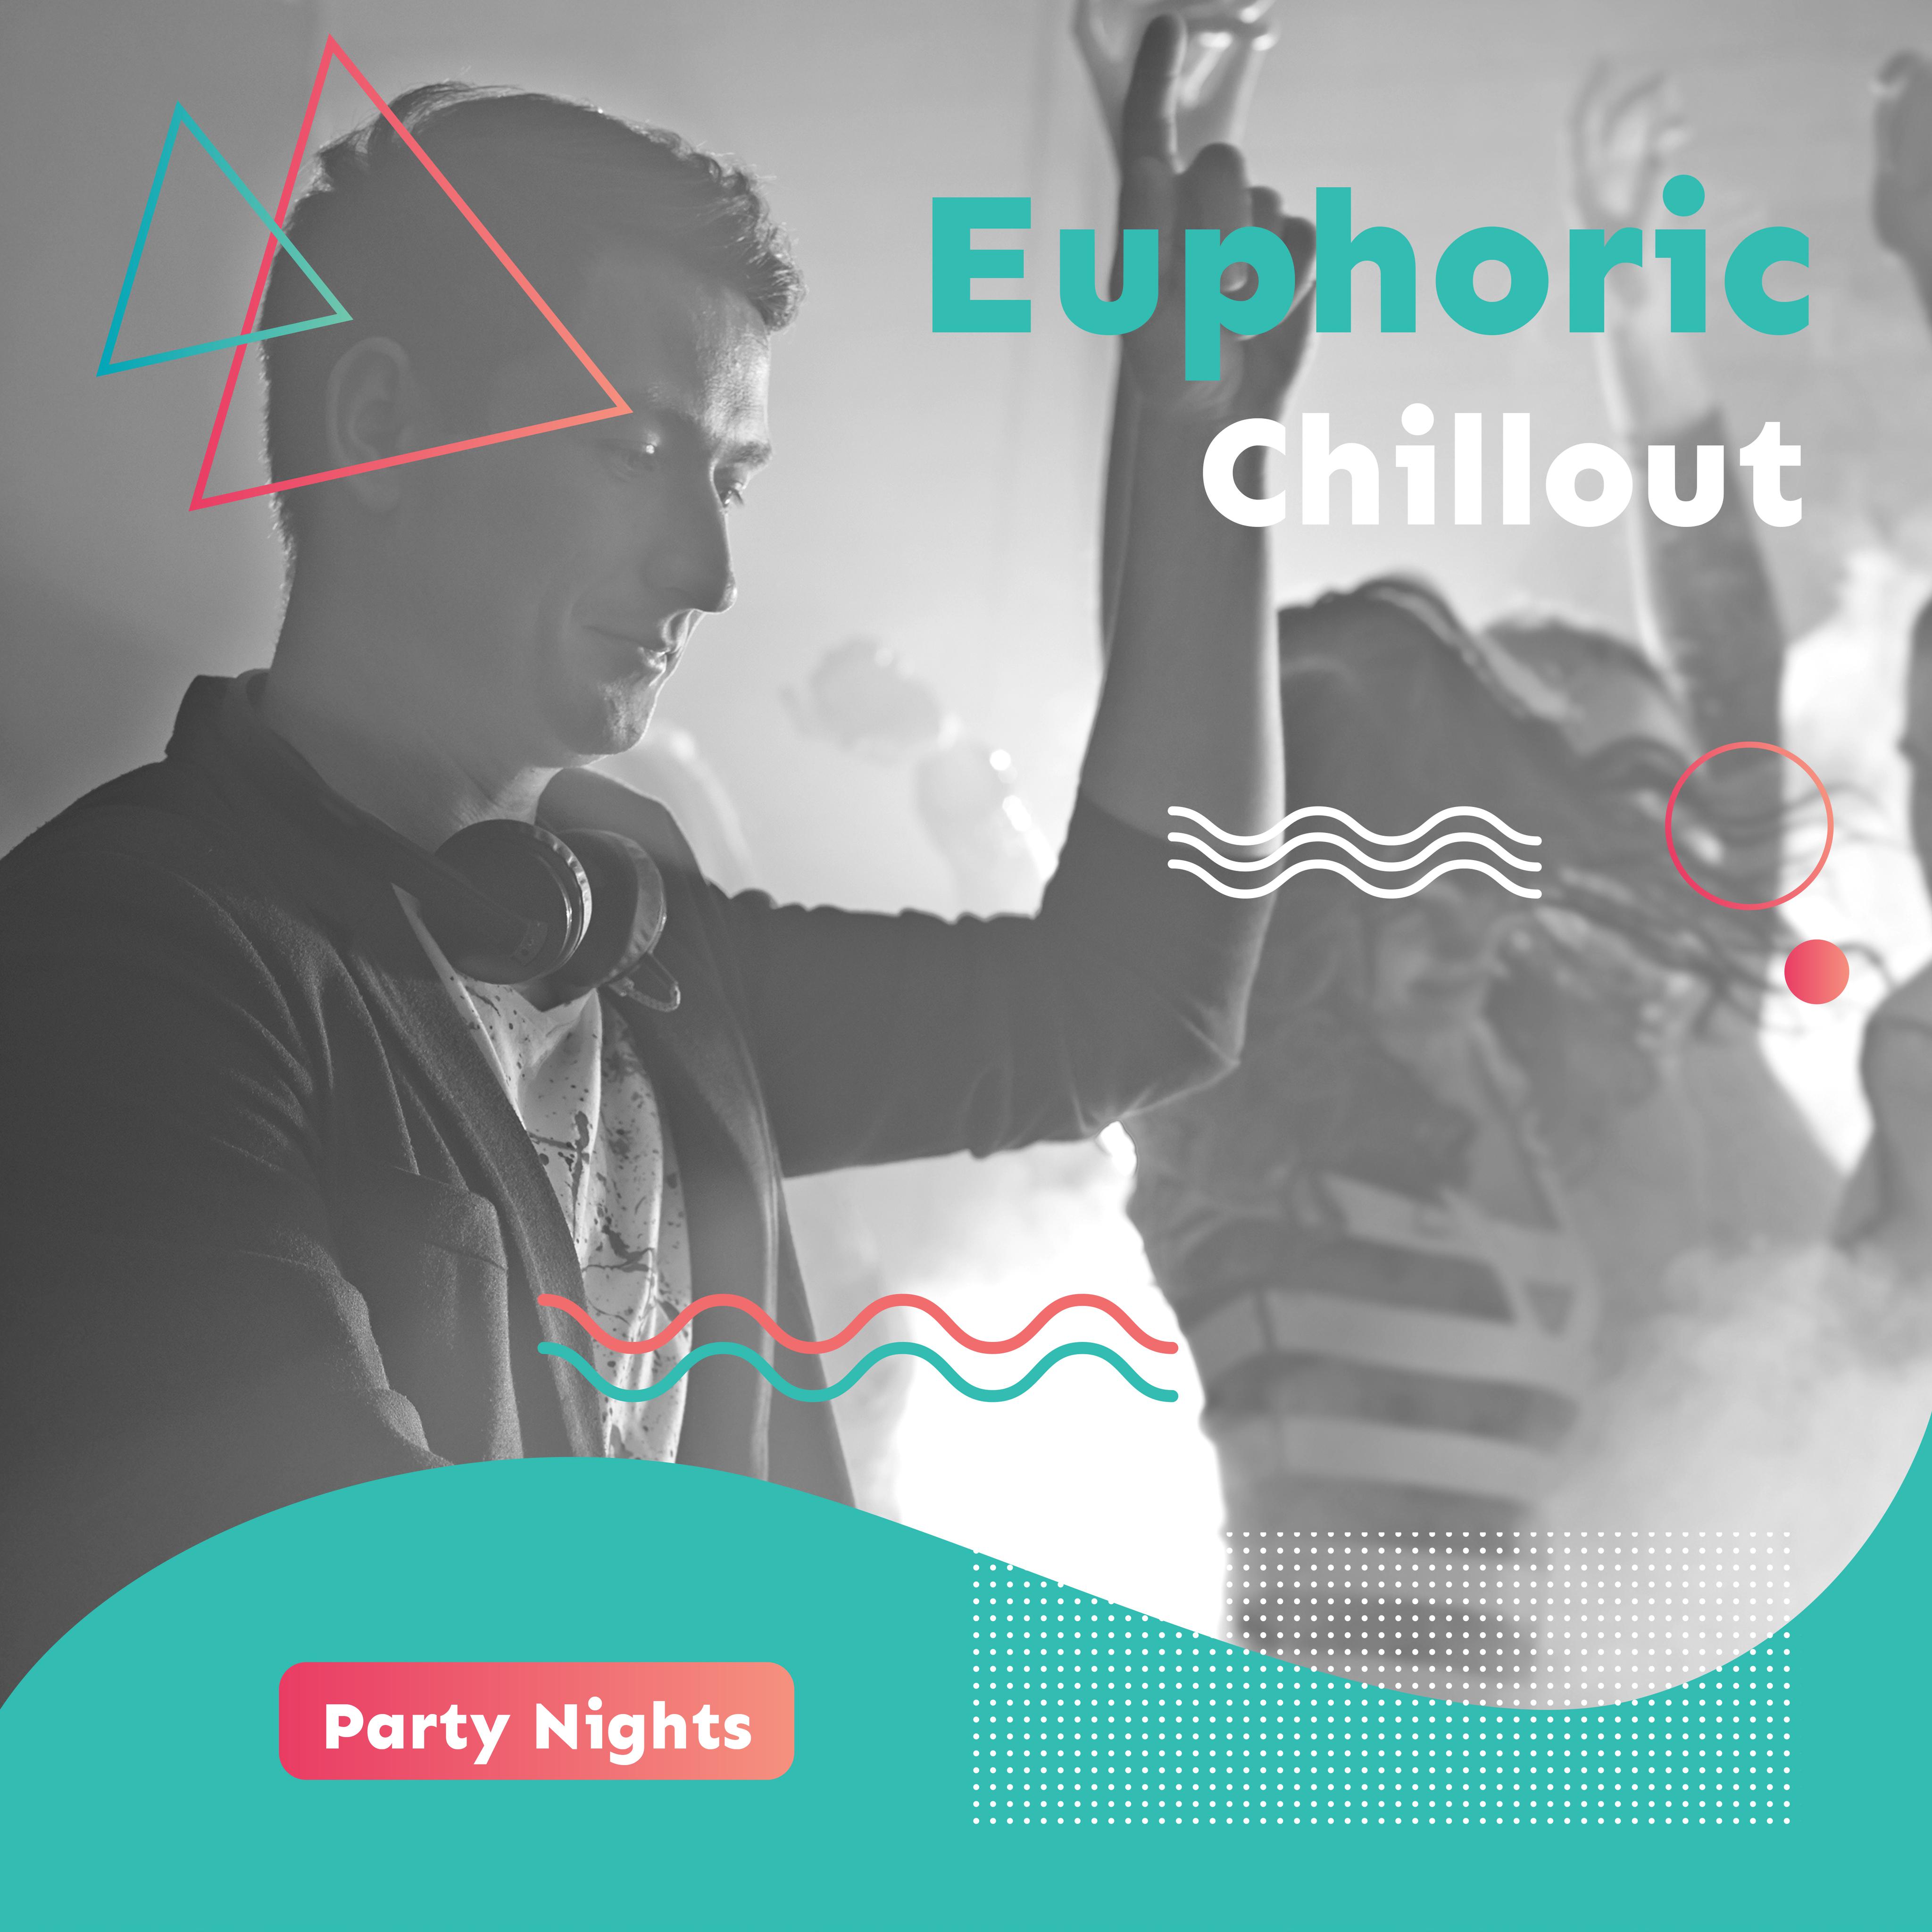 Euphoric Chillout Party Nights: 2019 Fresh Chill Out Electronic Dance Party Beats, Perfect Music for Underground Club, Low BPM Pumping Beats & Sweet Melodies